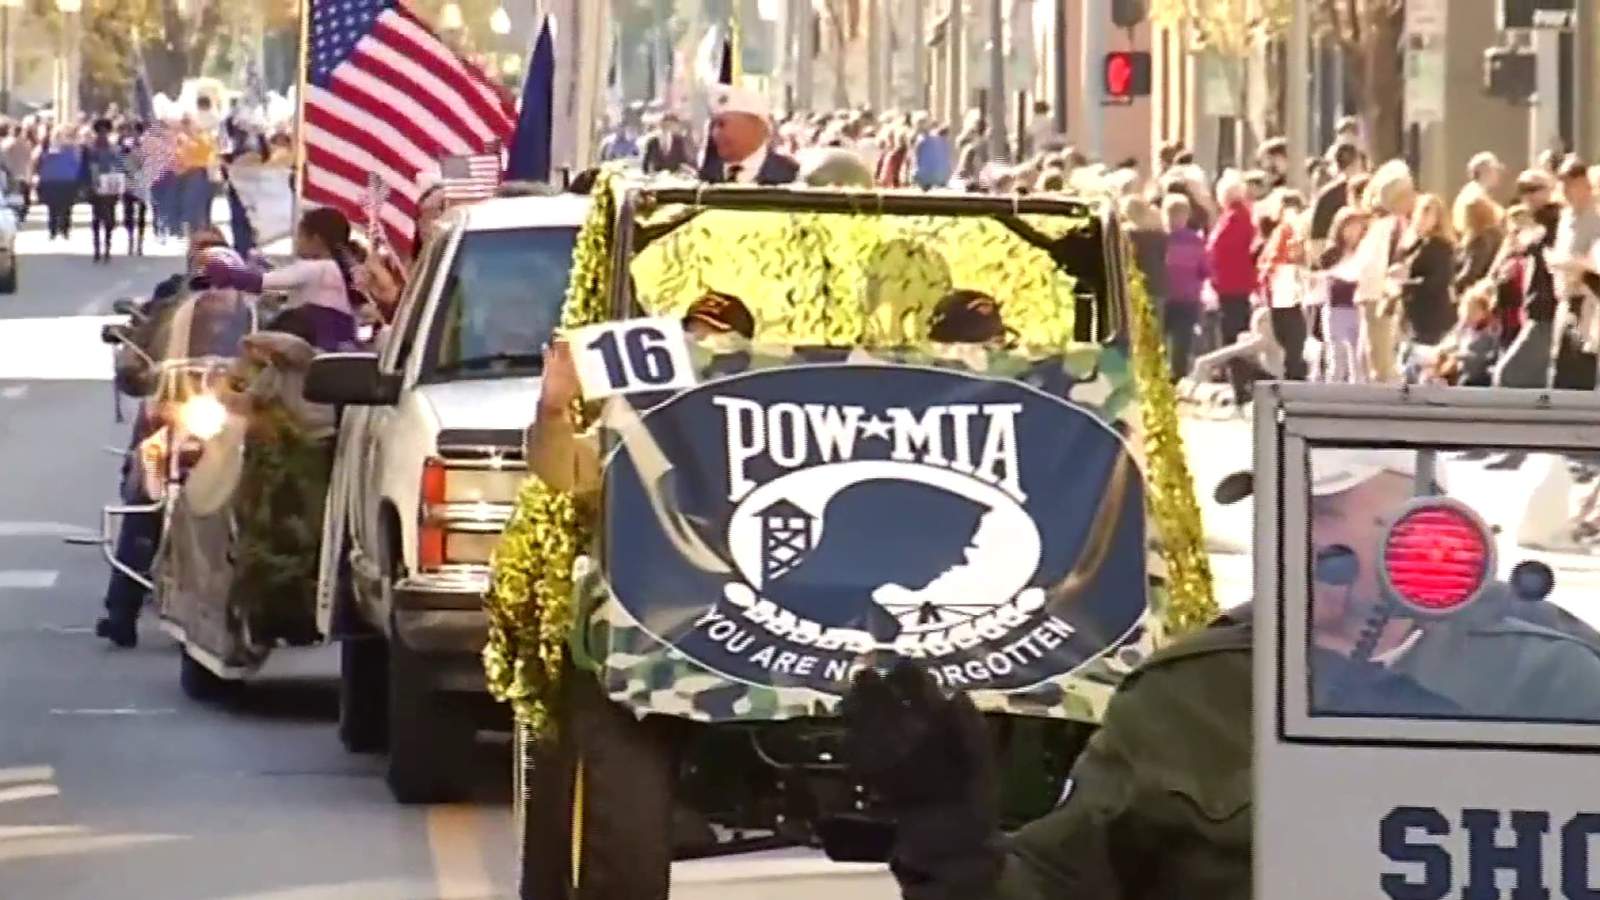 With Virginia’s Veterans Parade canceled, WSLS 10 will honor heroes with special broadcast